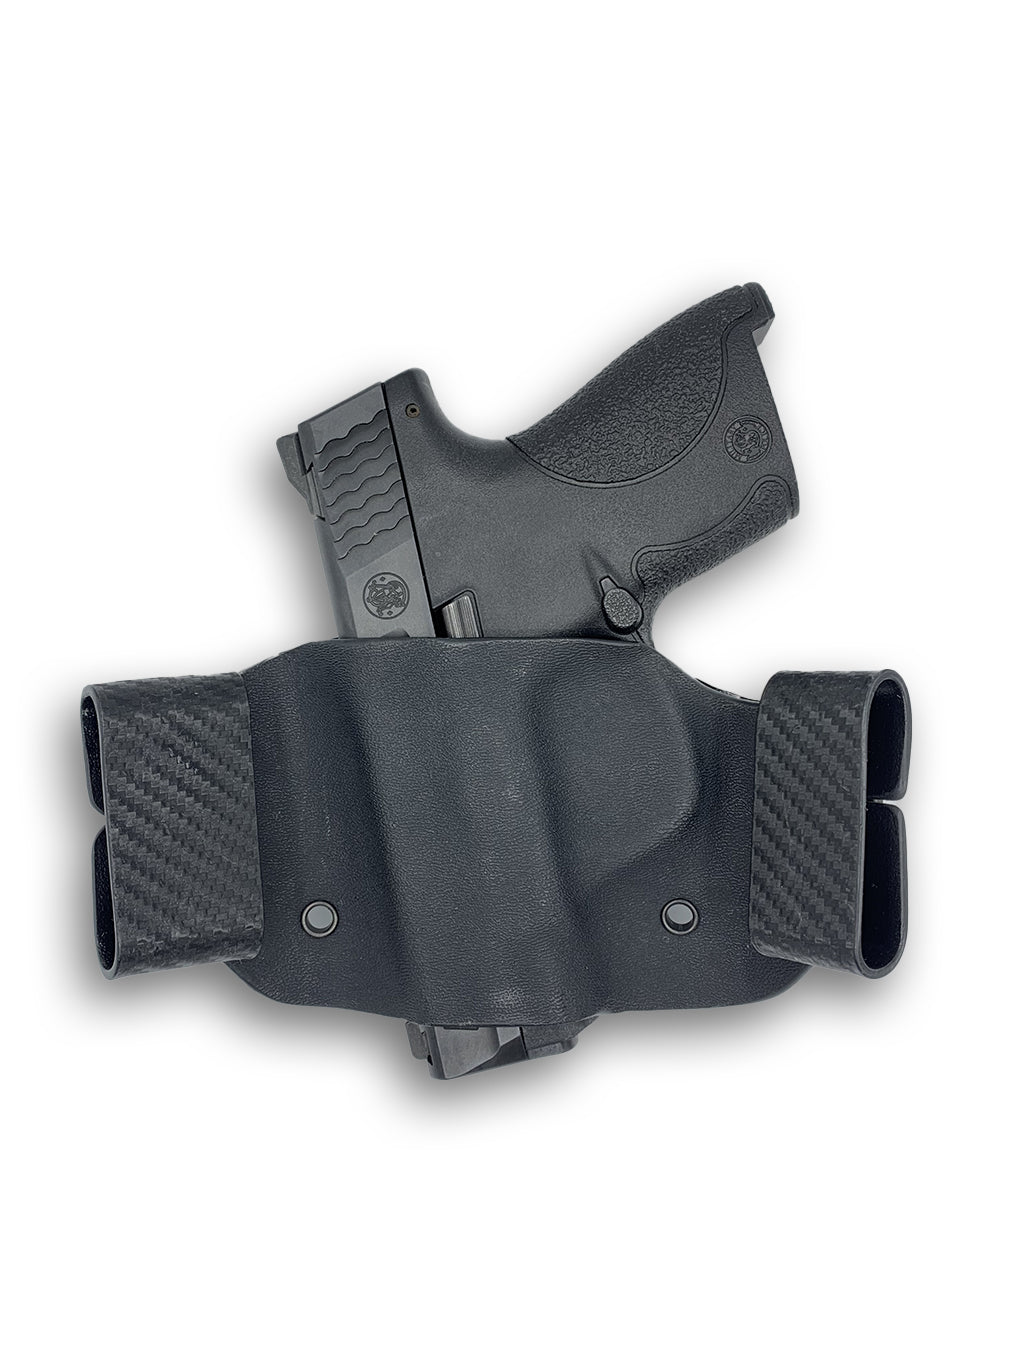 Smith & Wesson M&P Shield OWB Holster